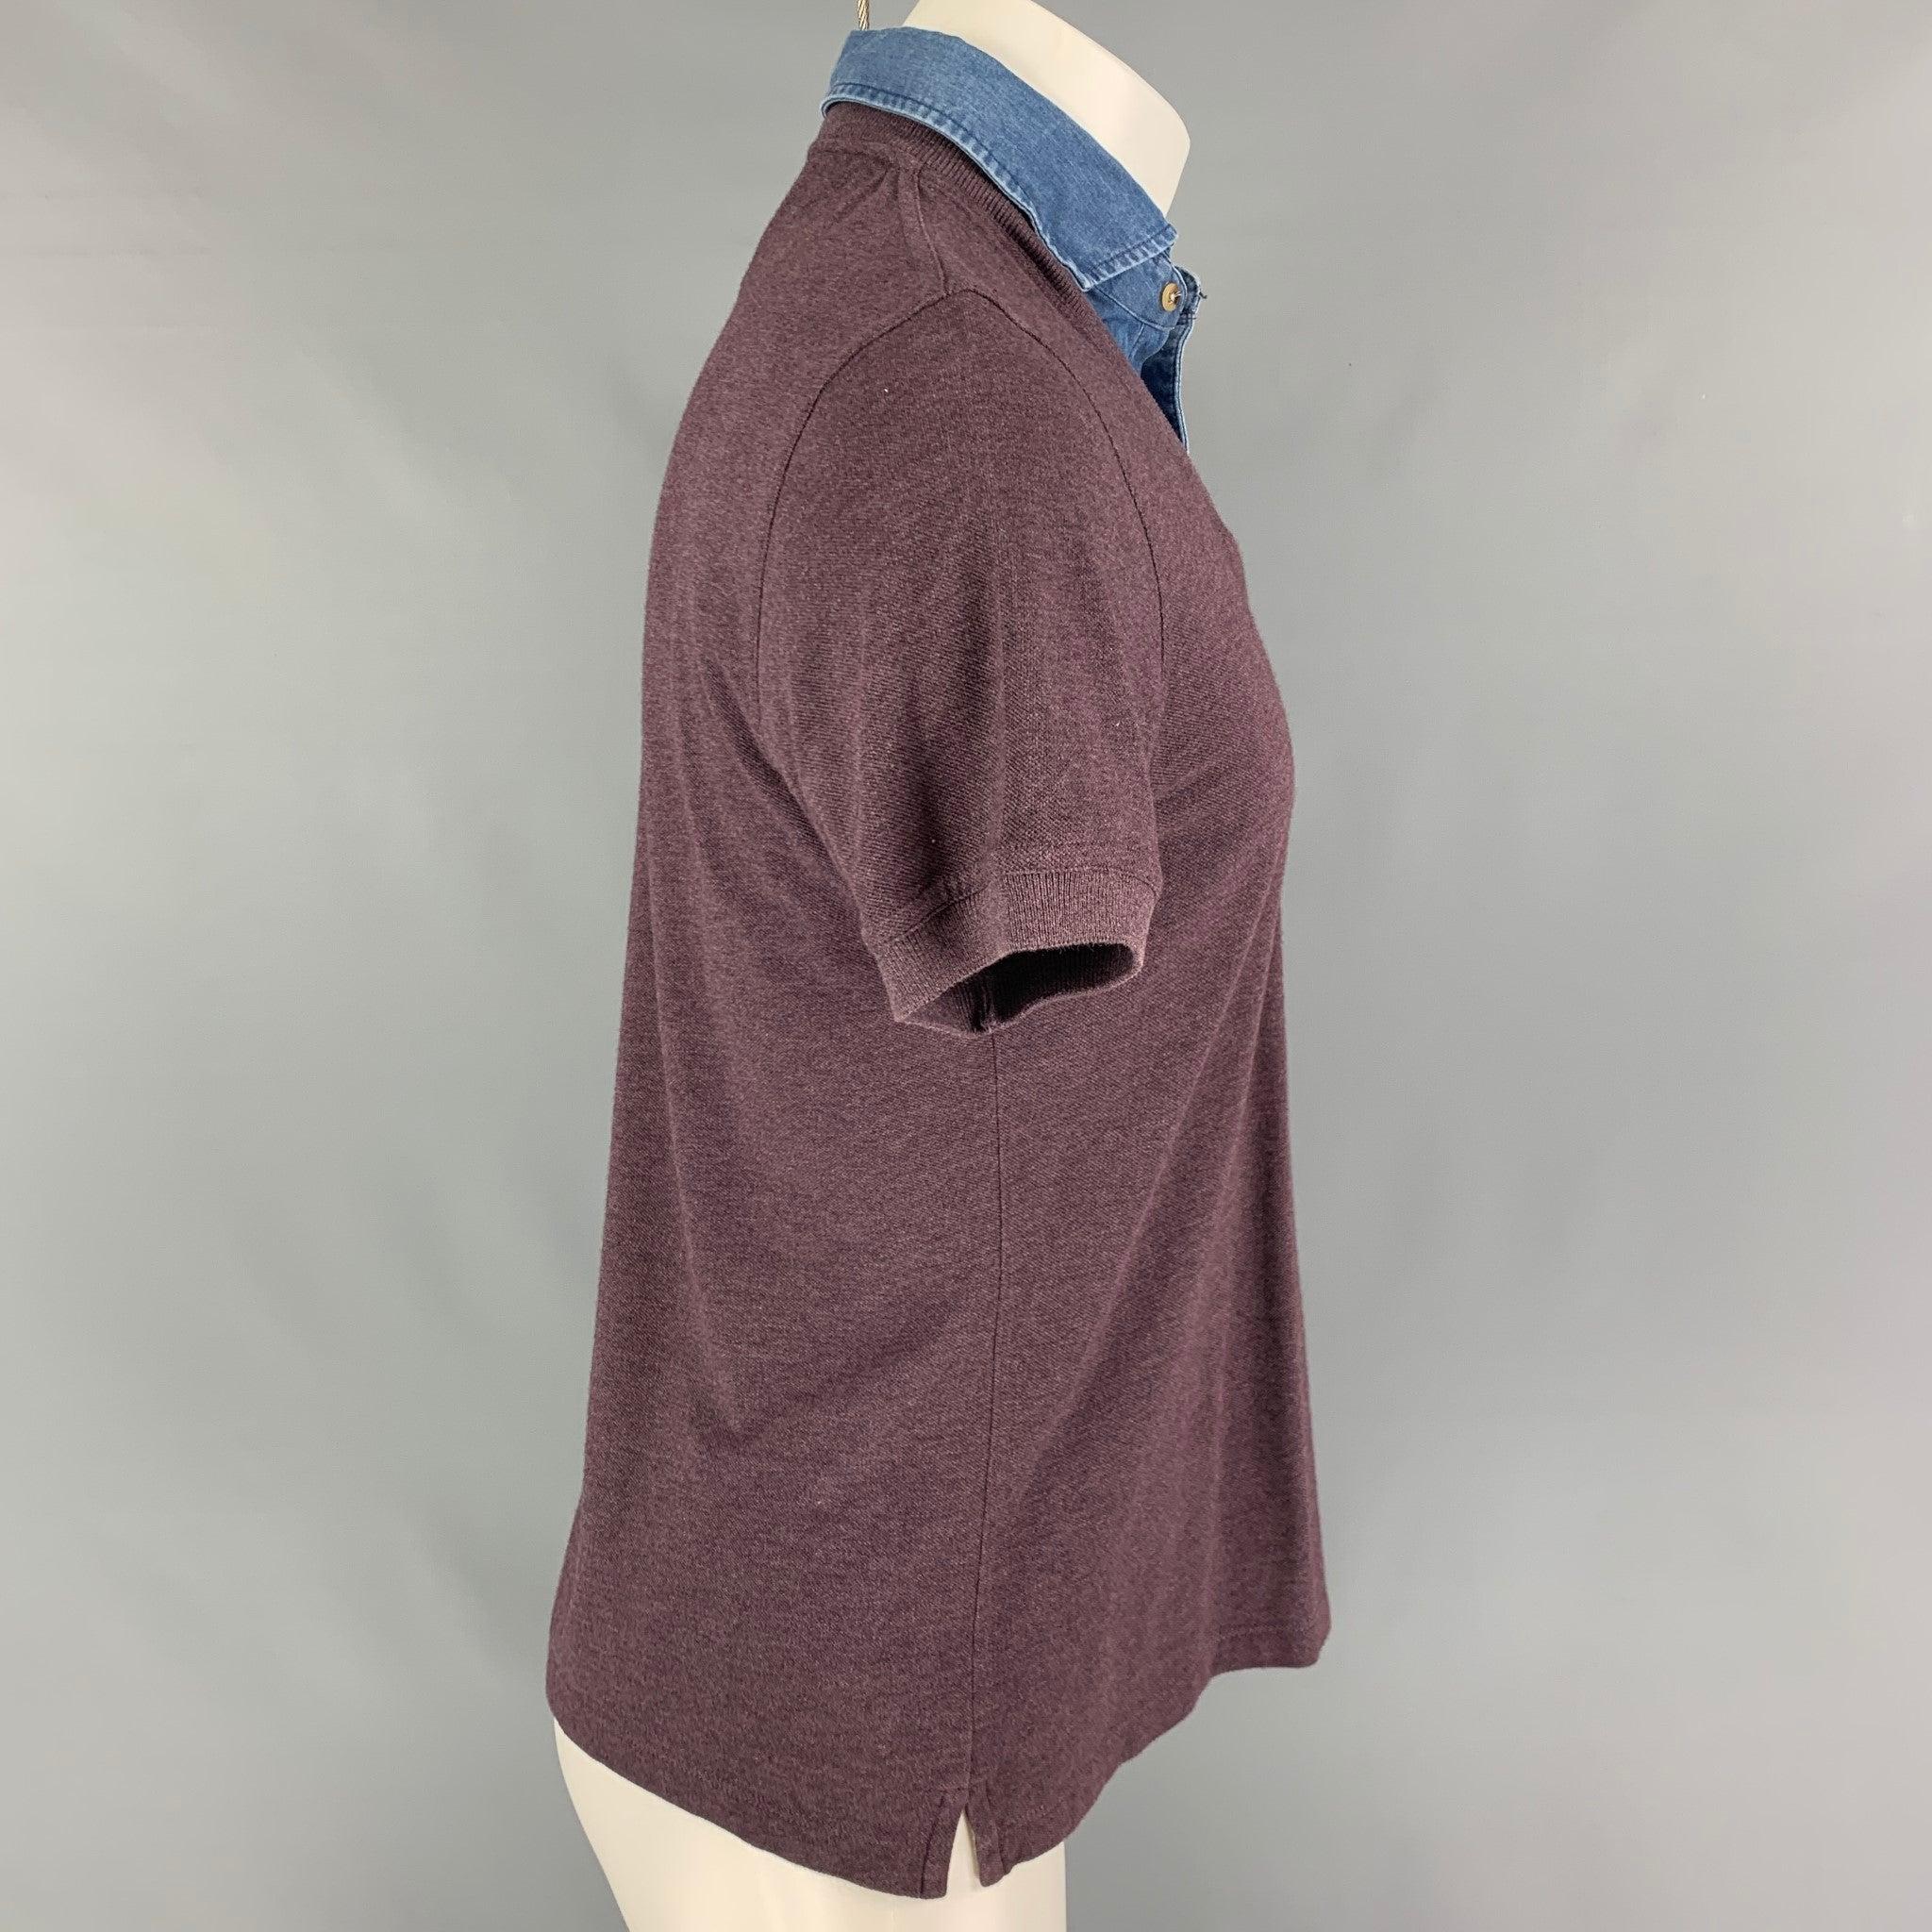 BRUNELLO CUCINELLI vest comes in a purple cotton featuring a shirt trim, short sleeves, and a v-neck. Made in Italy.
Very Good
Pre-Owned Condition.  

Marked:   S 

Measurements: 
 
Shoulder: 16.5 inches  Chest: 38 inches  Sleeve: 9 inches  Length: